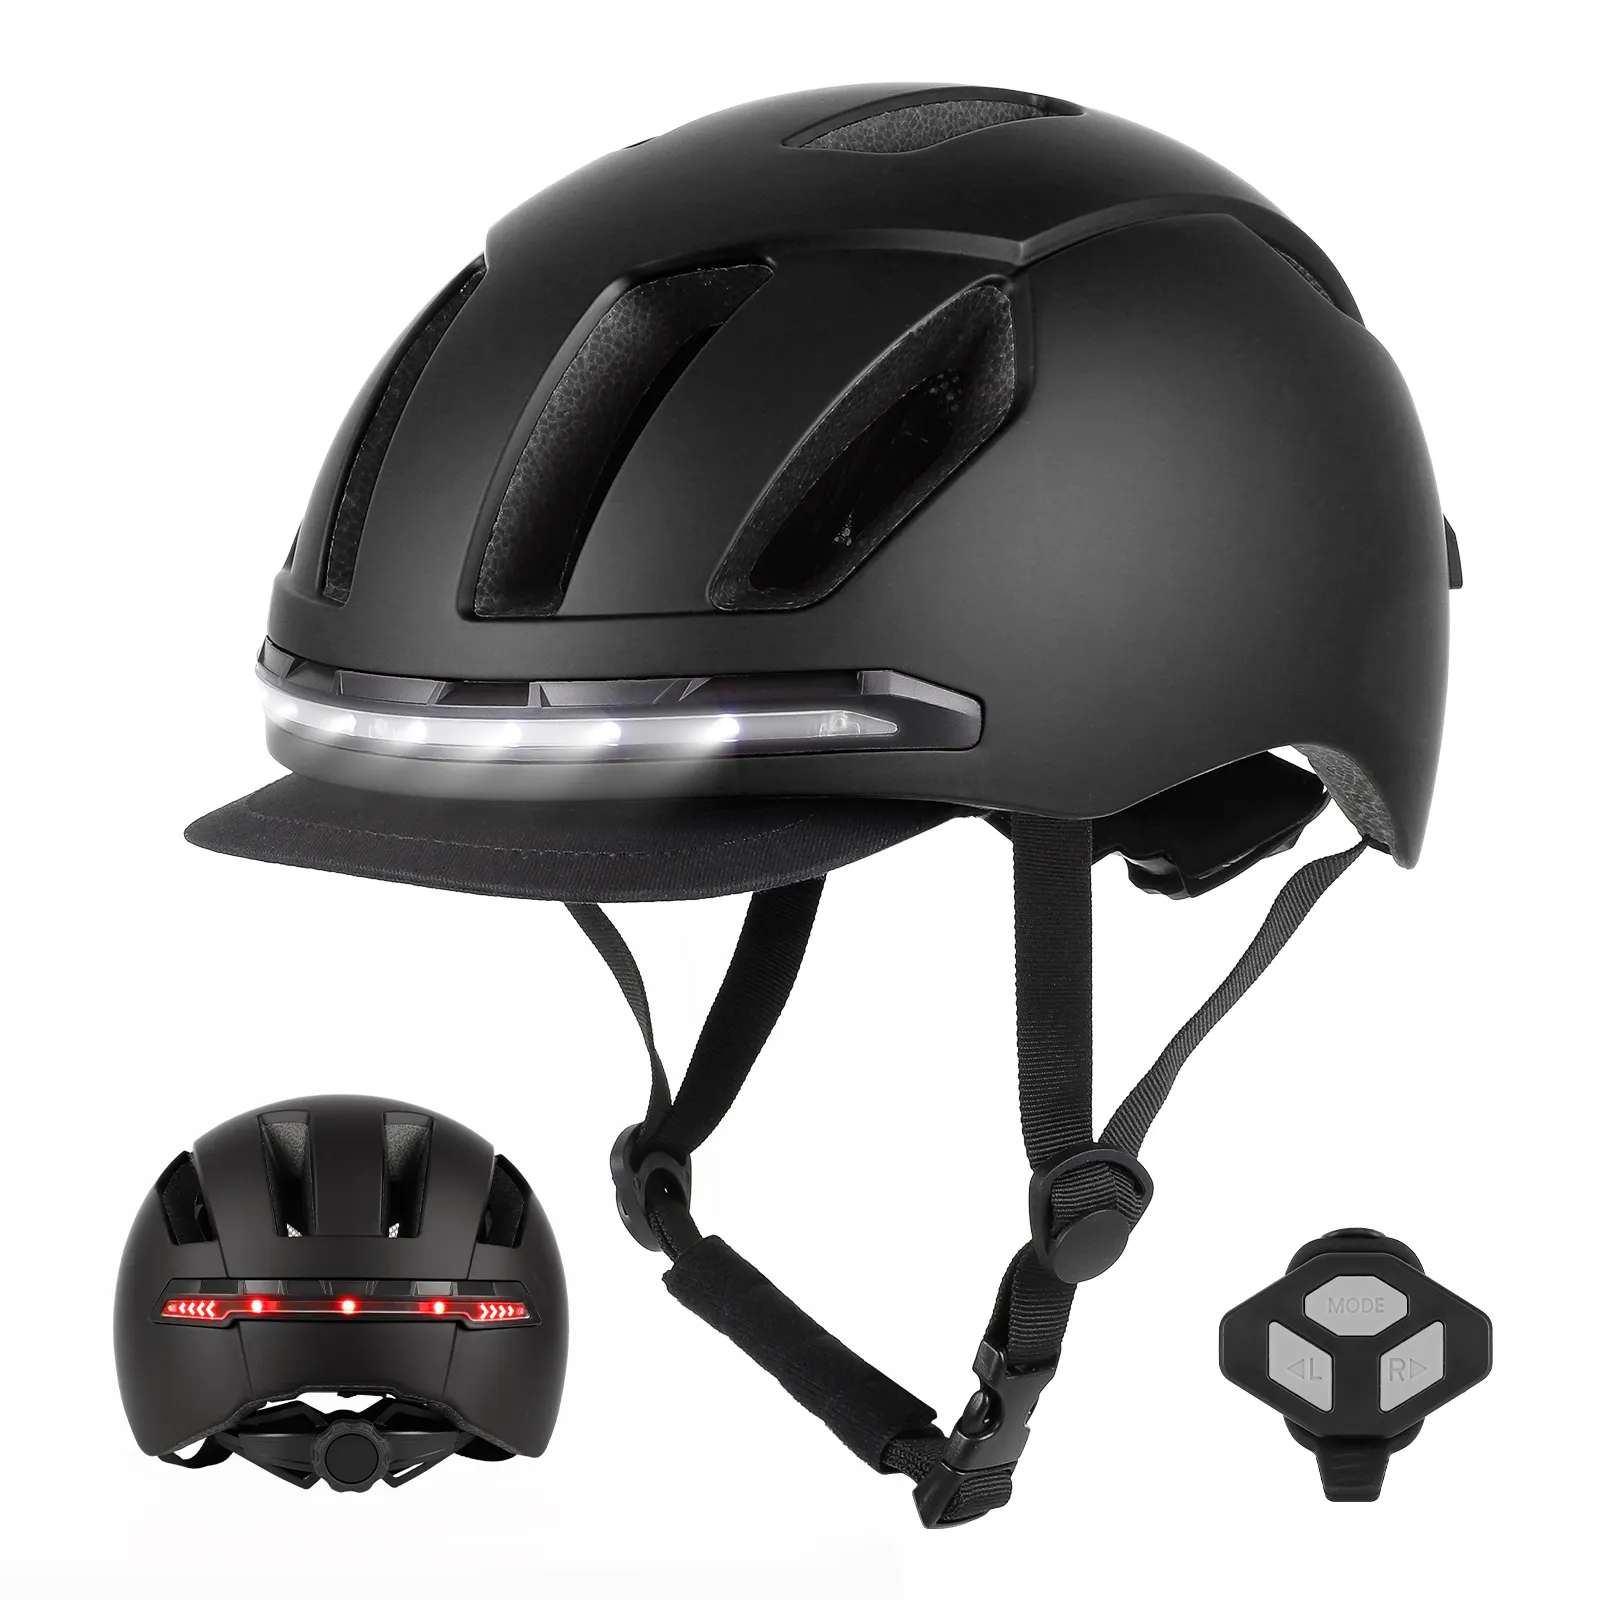 Urban LED Light Protective Helmet with Remote Control for Xiaomi Electric Scooter Protection Bike Accessories